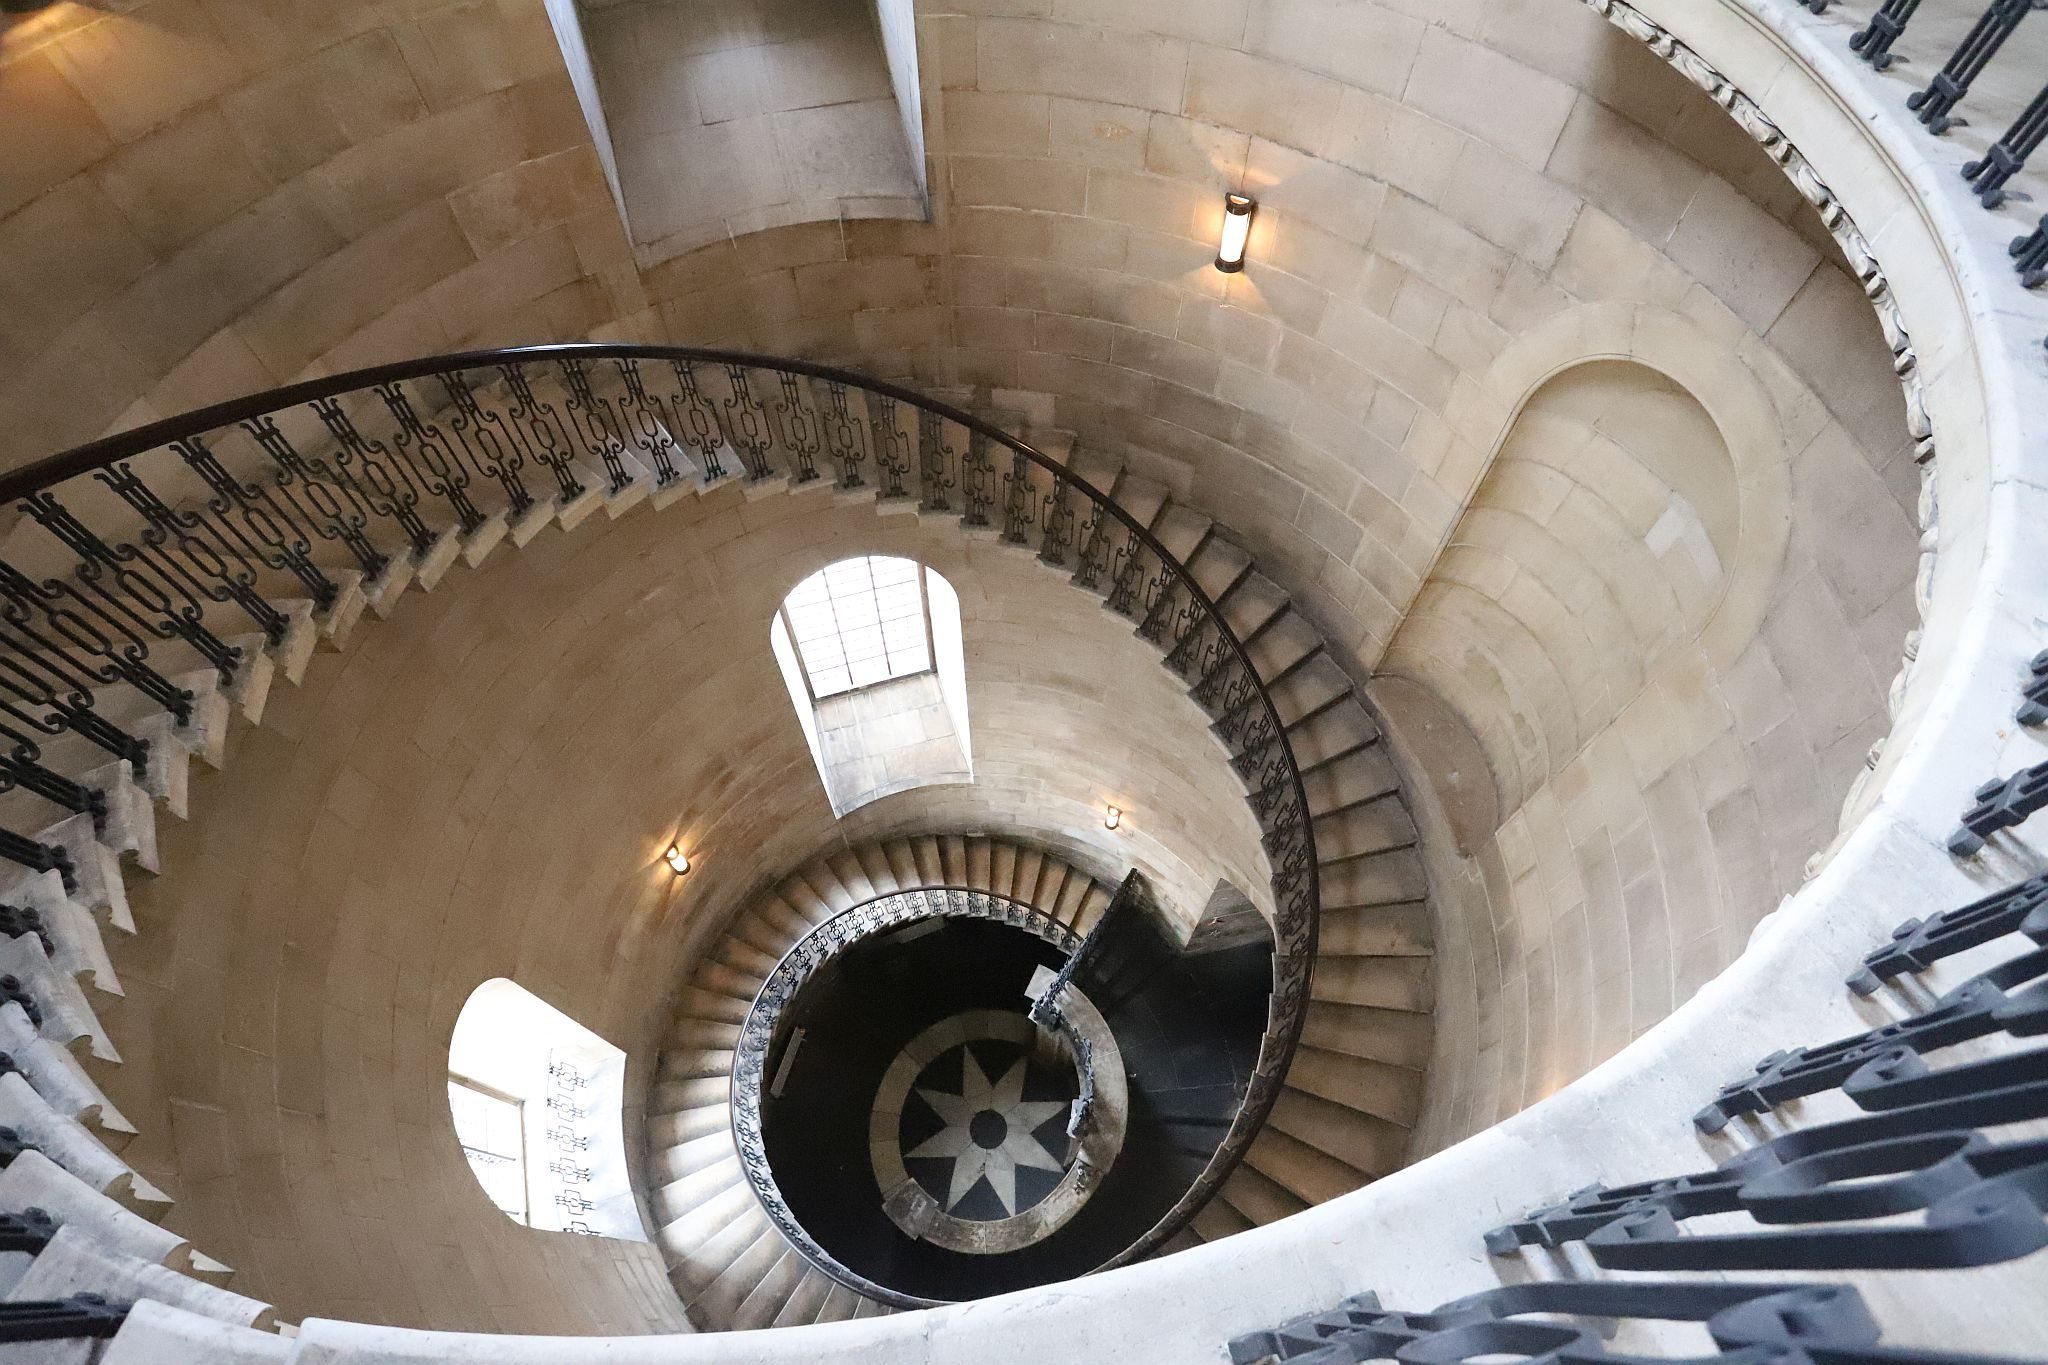 The Geometric Staircase of the South West tower, known to Harry Potter film fans as the Devination Stairwell. St. Paul's Cathedral Triforium Tour, 09-Jan-2023.